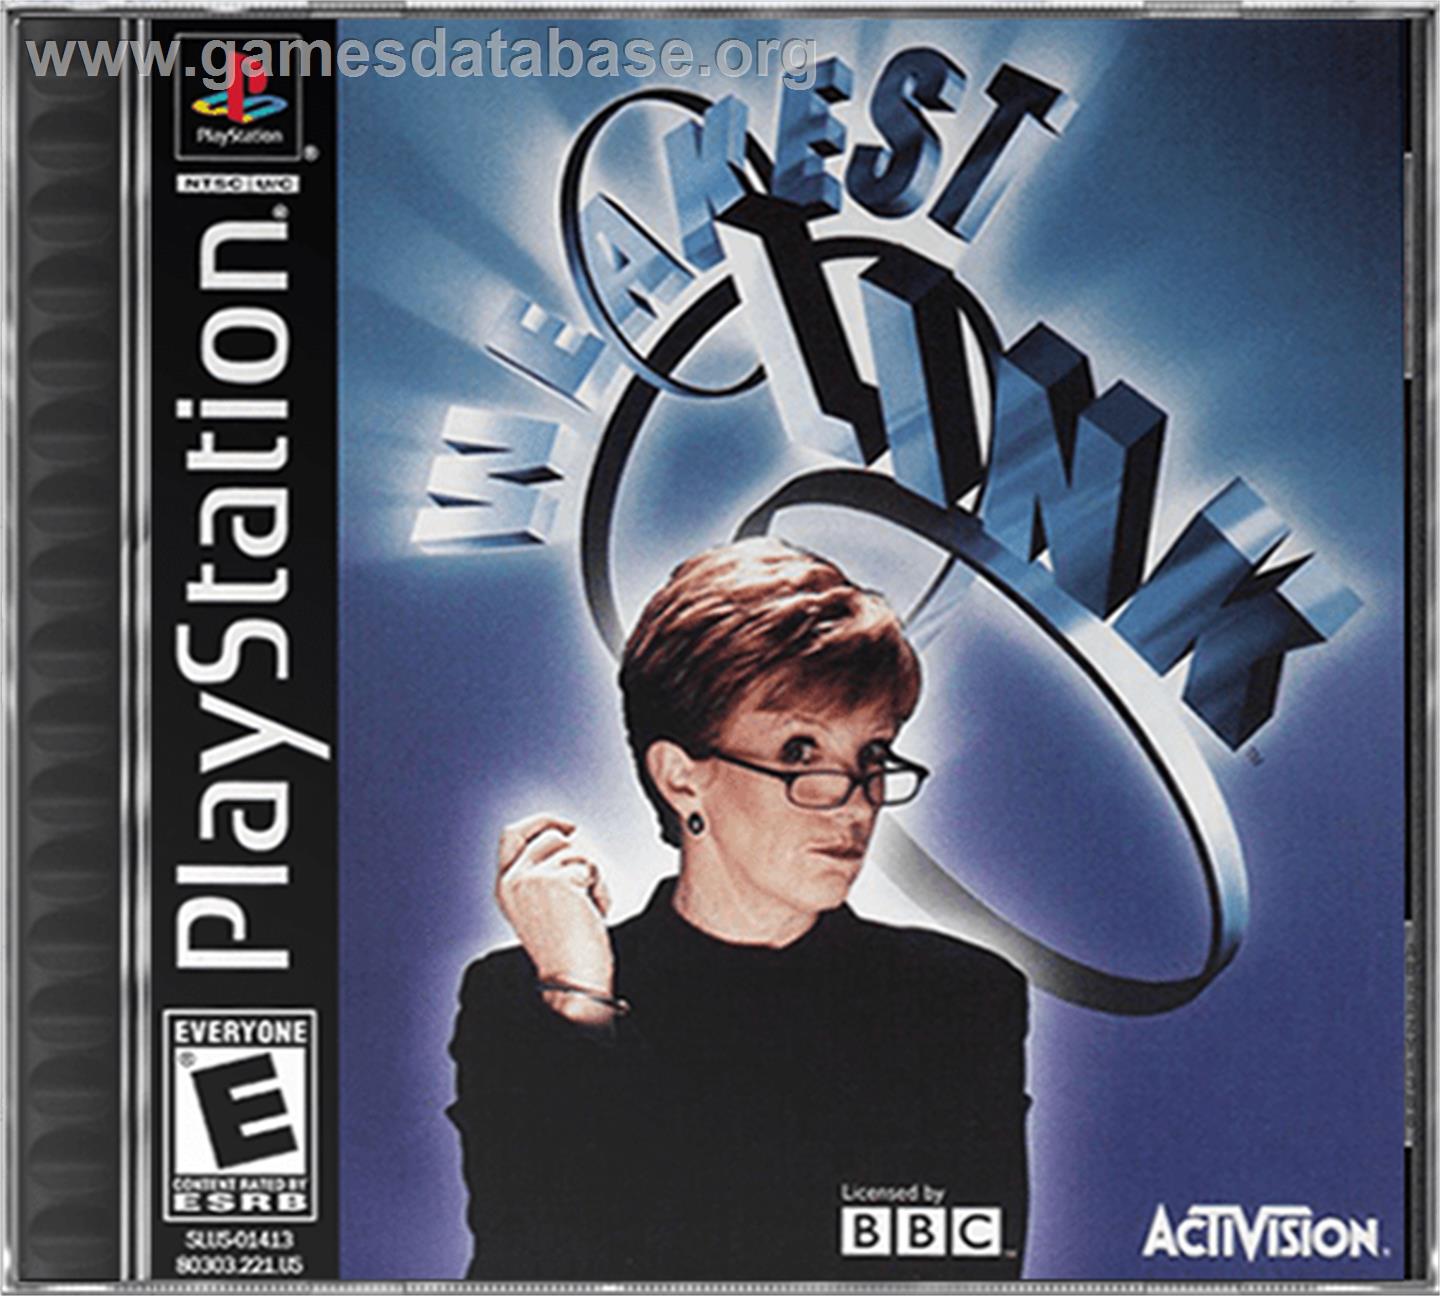 The Weakest Link - Sony Playstation - Artwork - Box